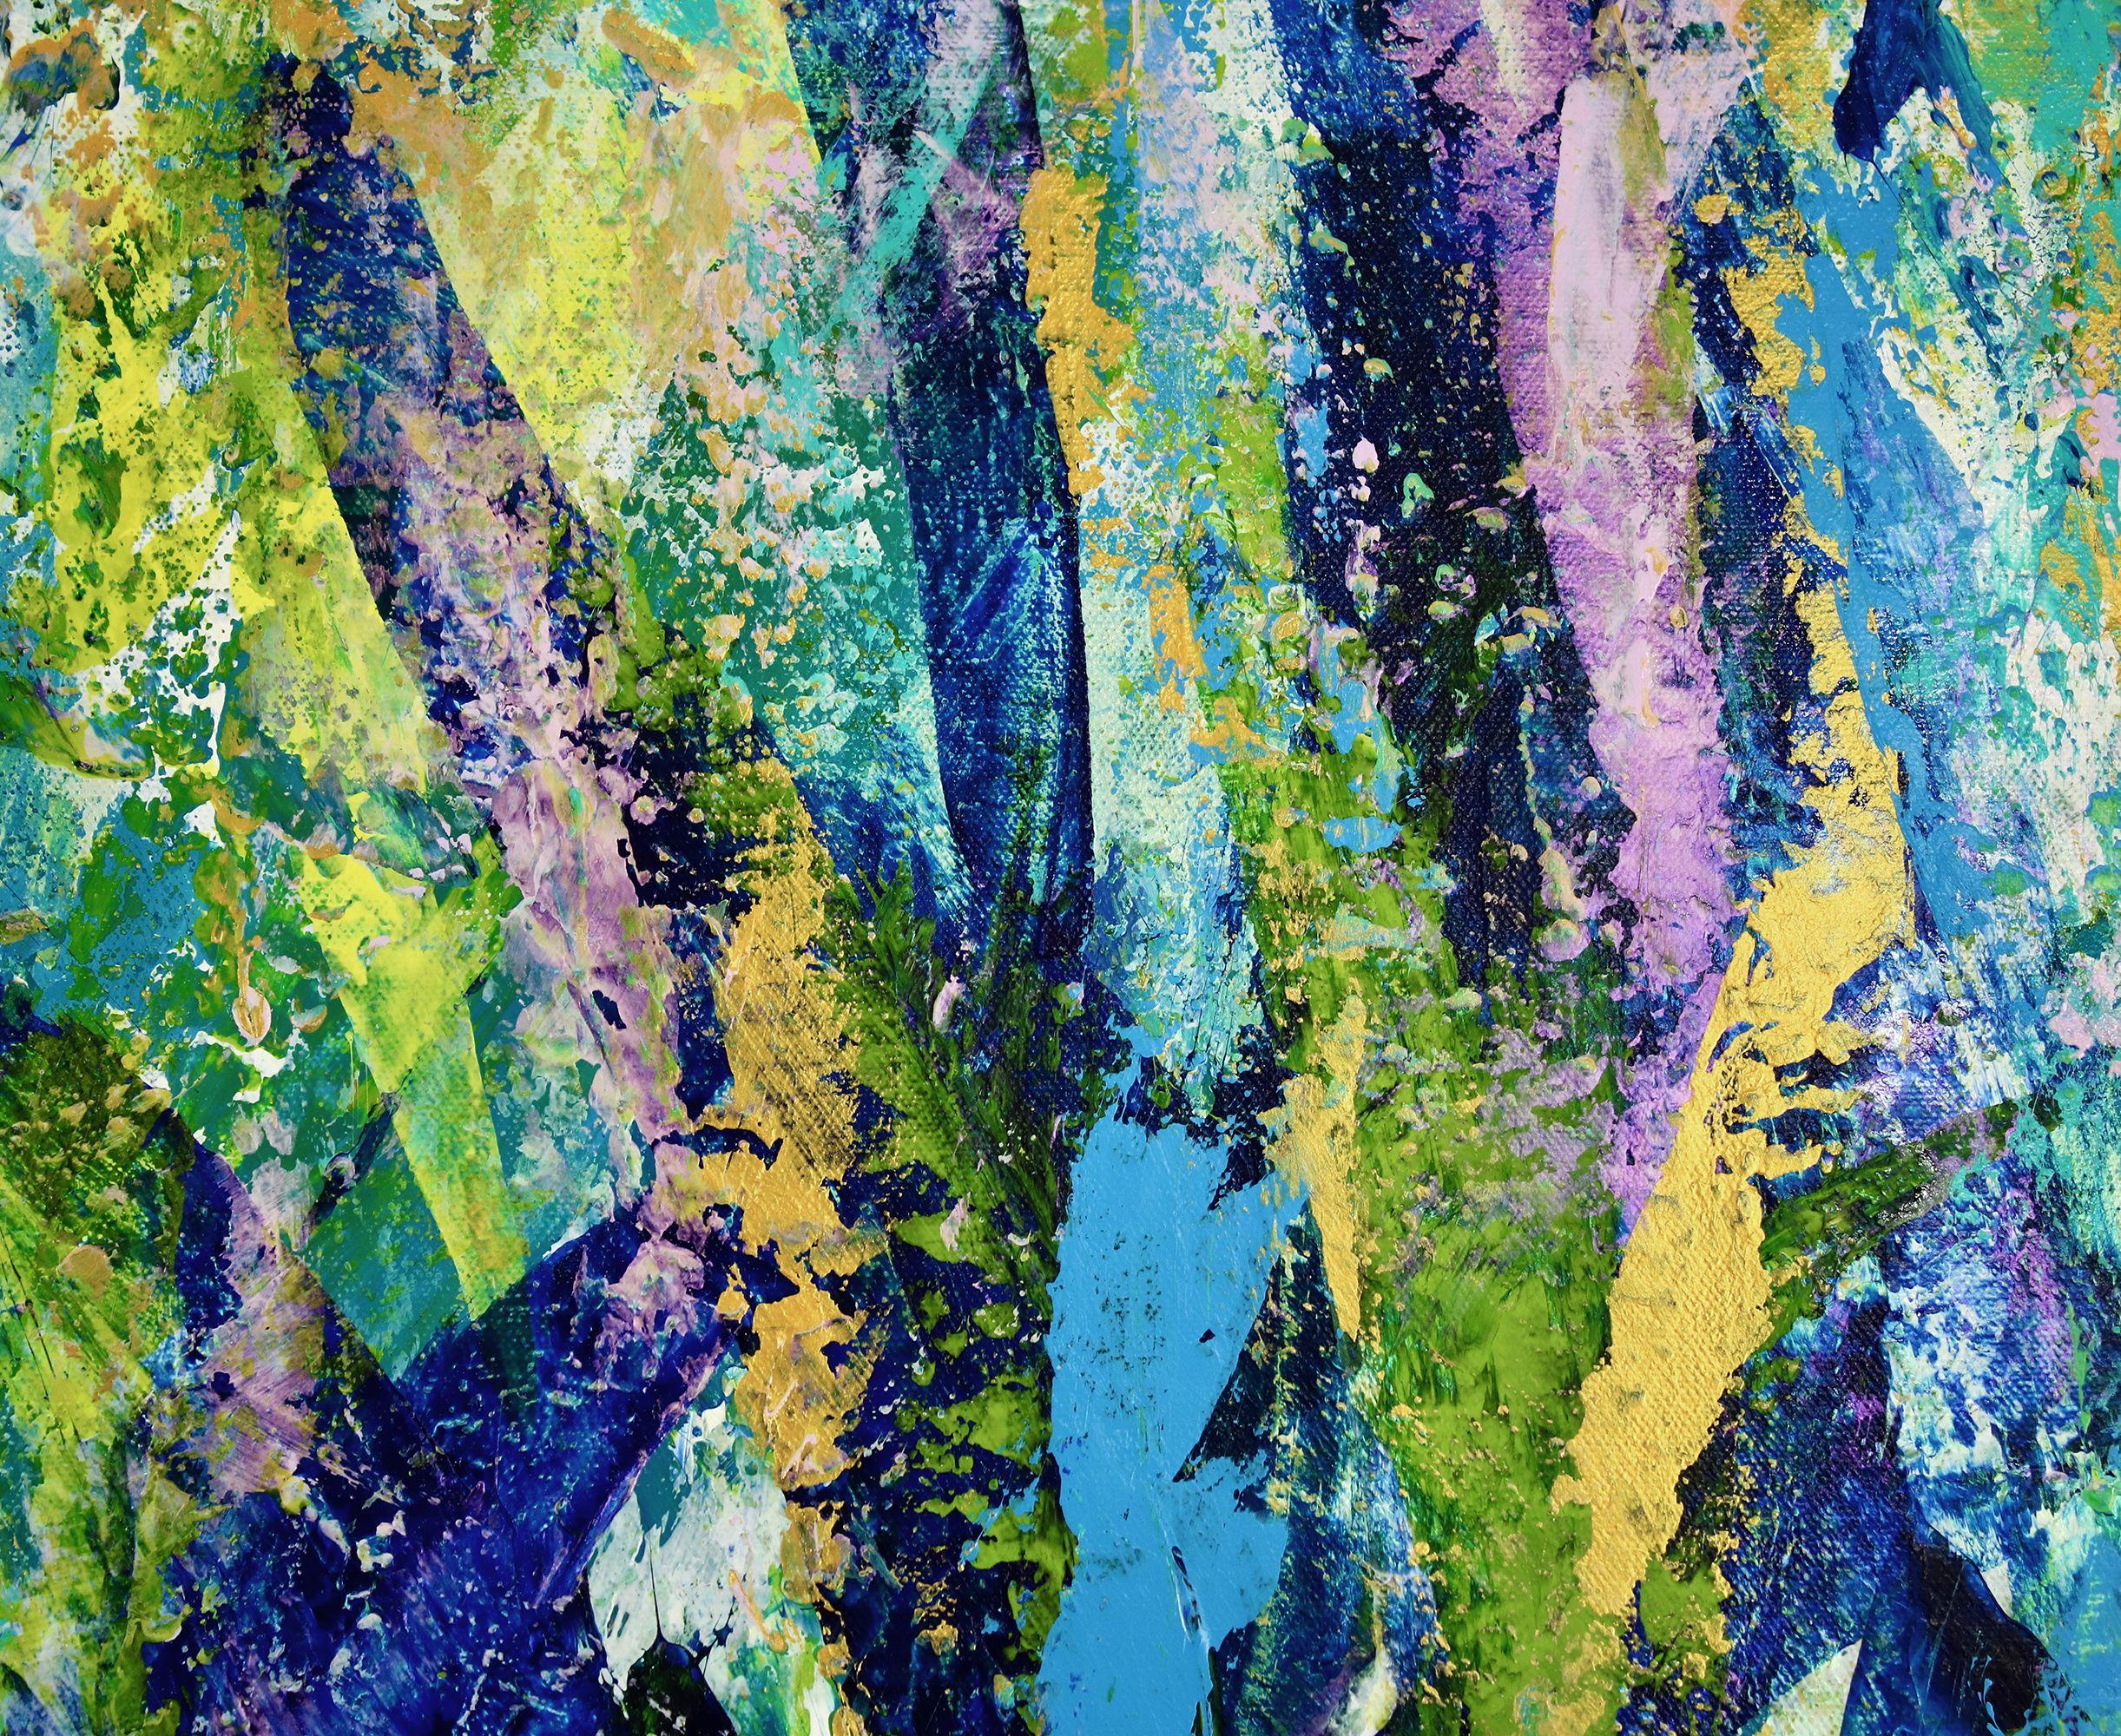 Regrowth (Lush Greenery), Painting, Acrylic on Canvas - Blue Abstract Painting by Nestor Toro